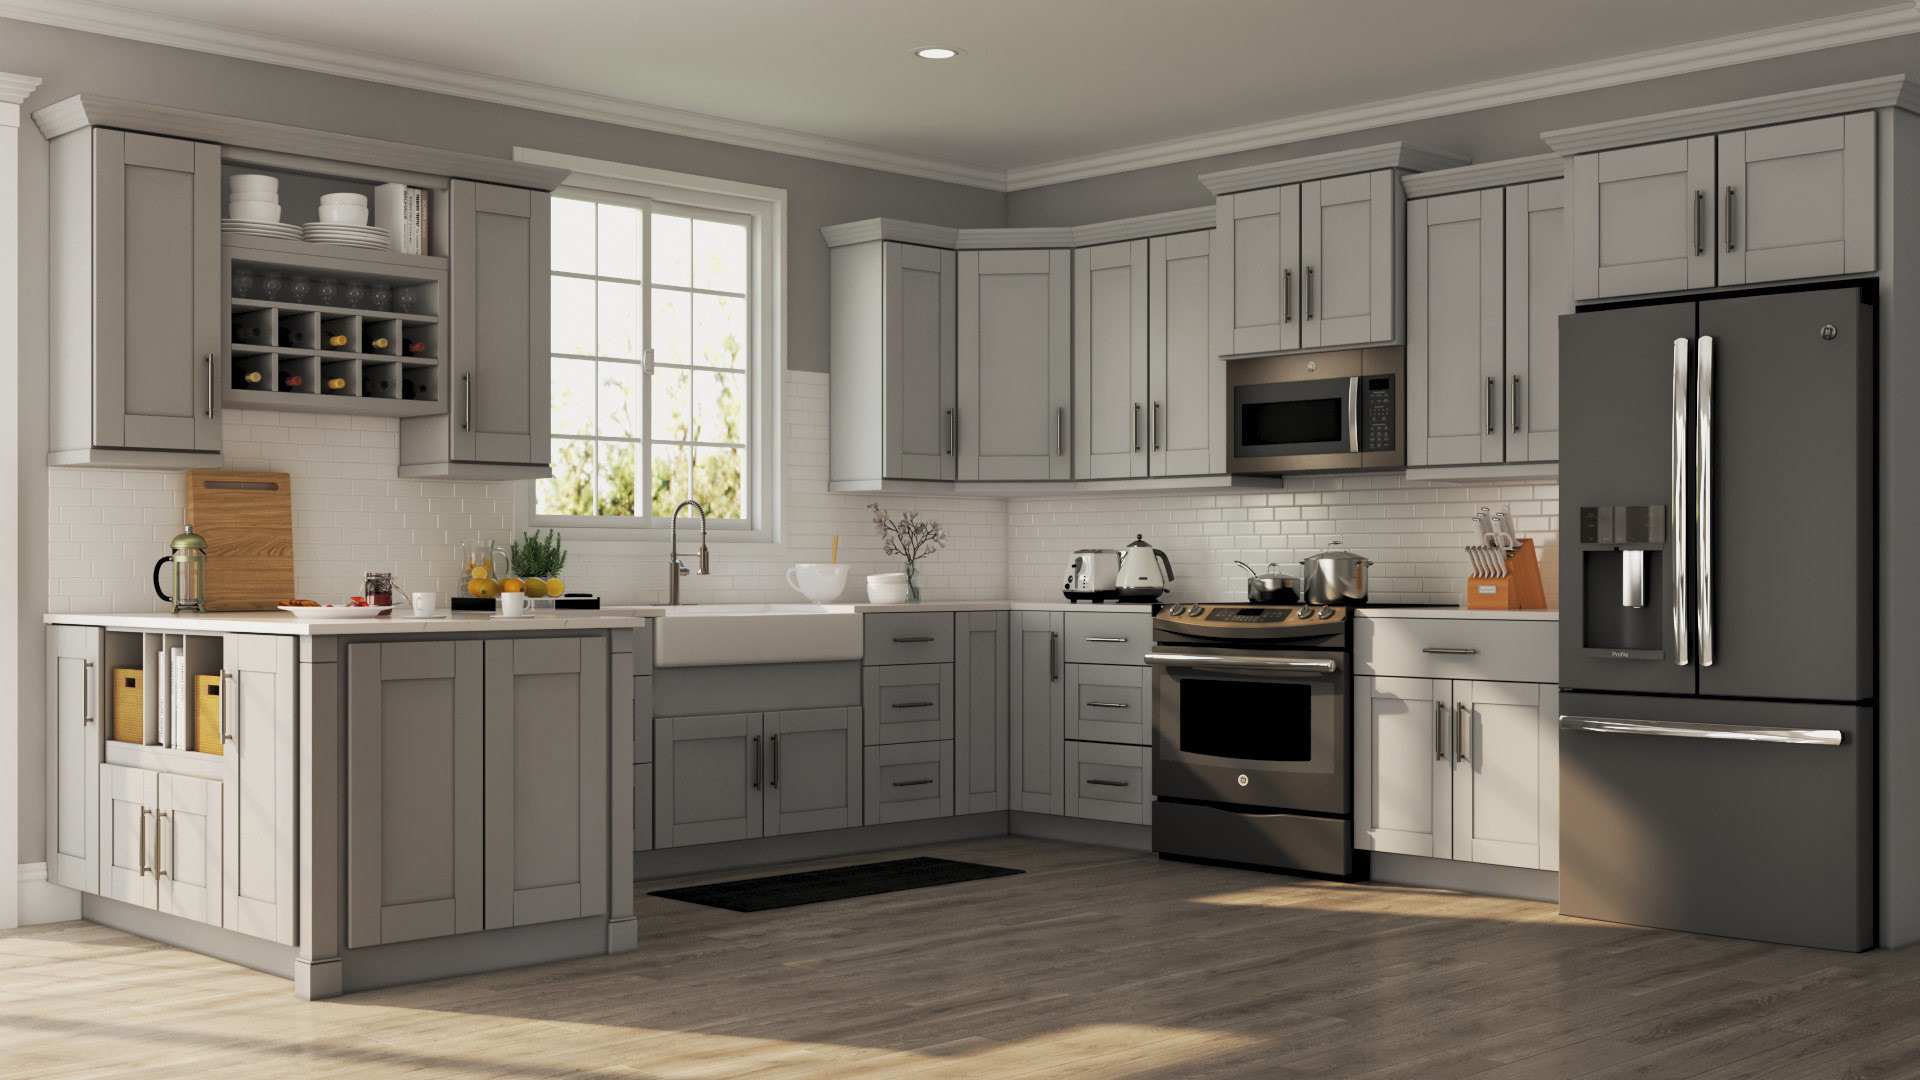 Grey Cabinets Kitchen
 Shaker Wall Cabinets in Dove Gray – Kitchen – The Home Depot